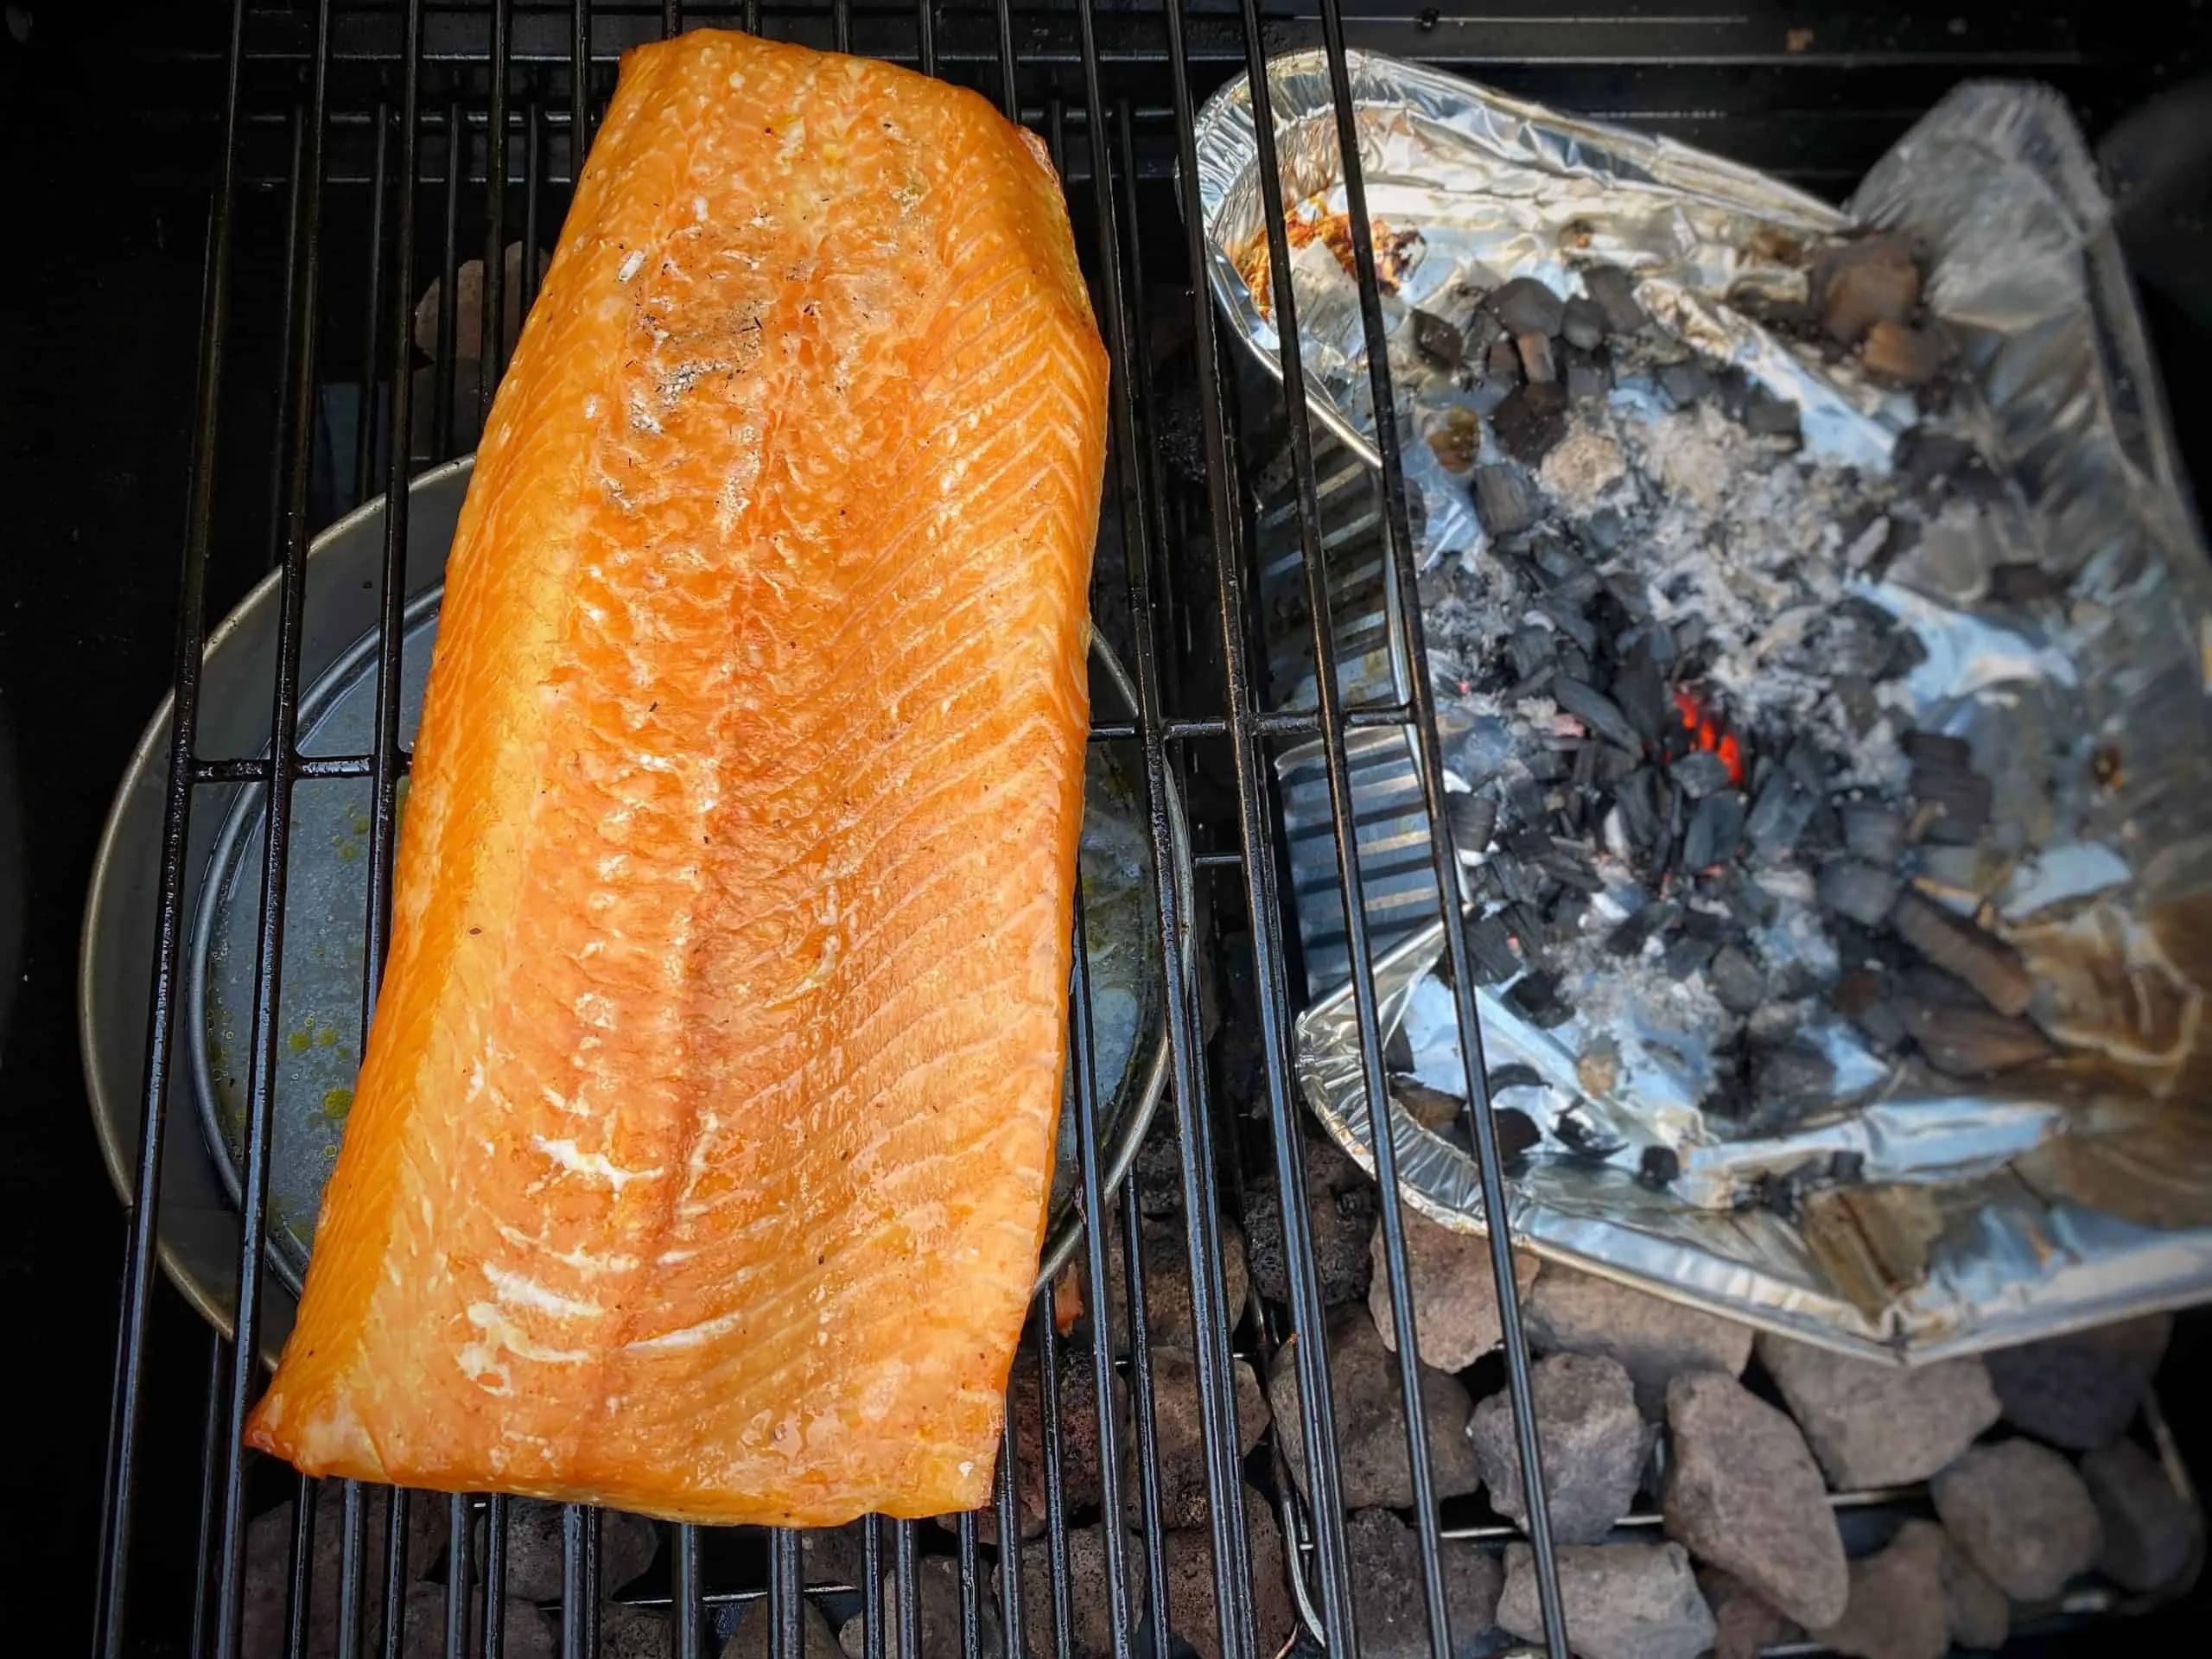 gas grill smoked salmon - How do you grill salmon on a gas grill without sticking it